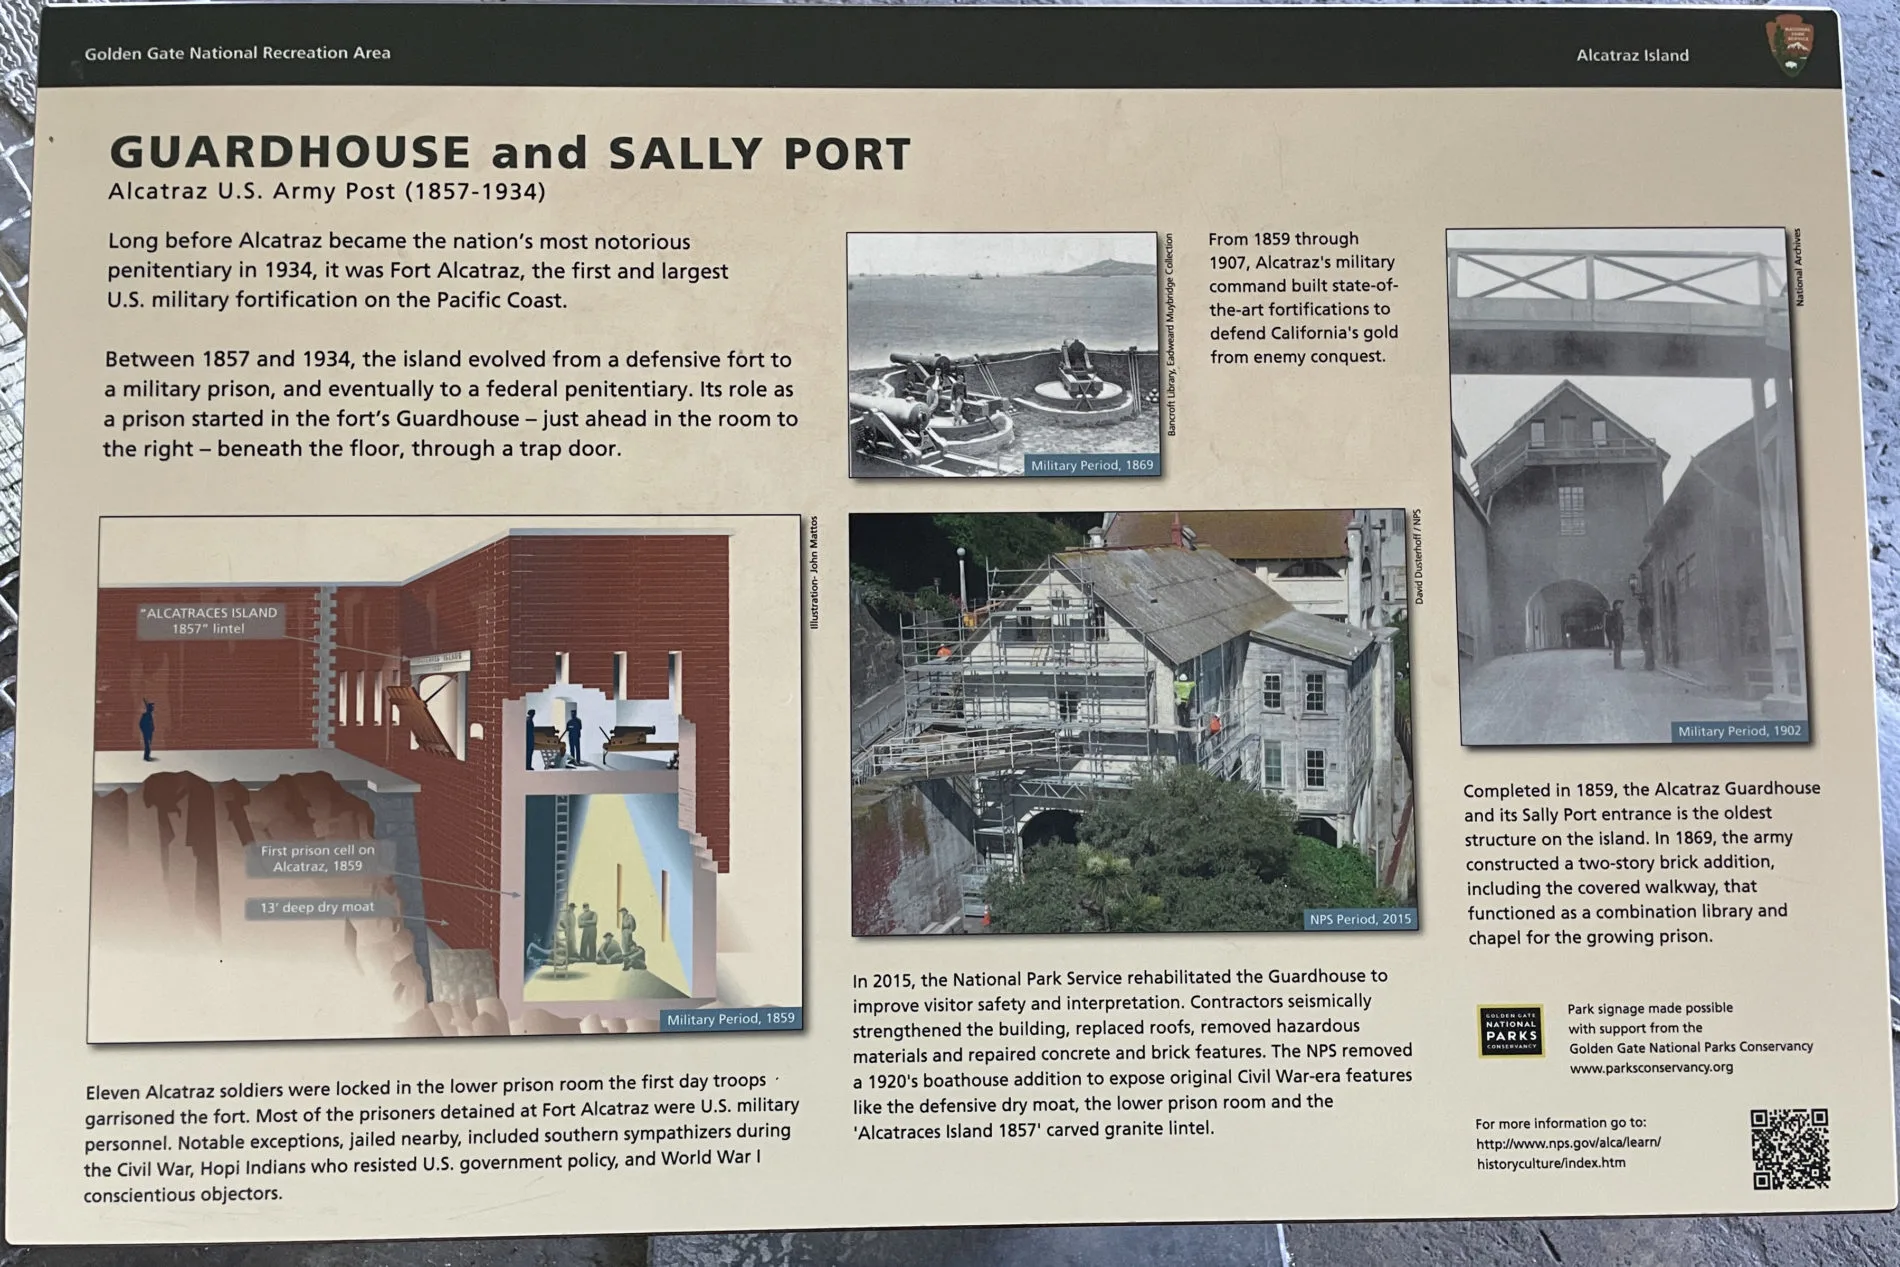 Sign describing some of the buildings, features, and armaments from 1857 to 1934 when the island was Fort Alcatraz.